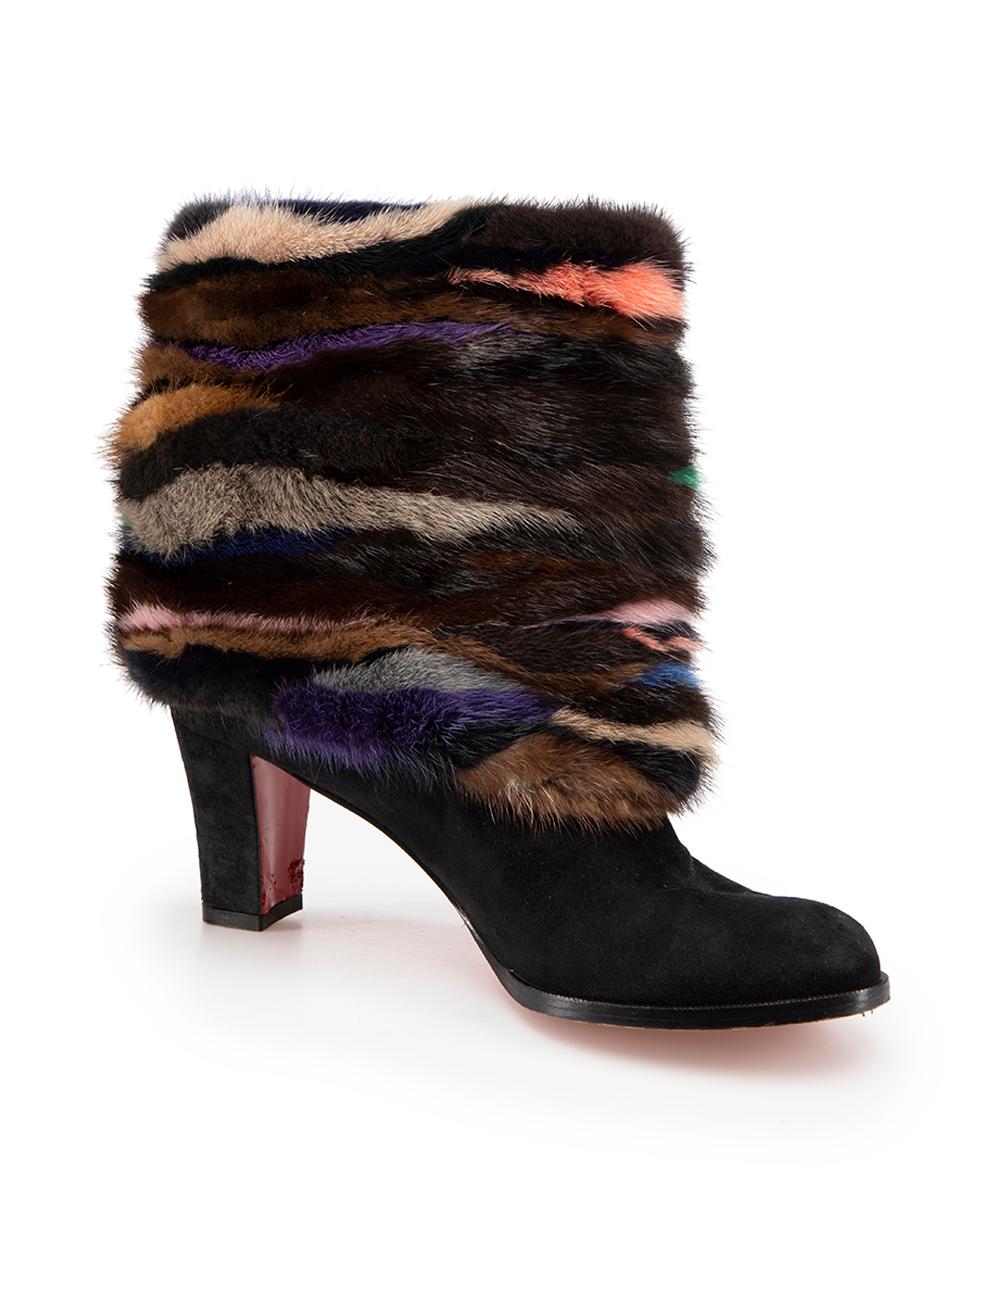 CONDITION is Very good. Minimal wear to shoes is evident. Minimal wear to both boot heels with abrasions to the suede on this used Christian Louboutin designer resale item.

Details
Alexandra 70
Black
Suede
Ankle boots
Multicolour striped mink